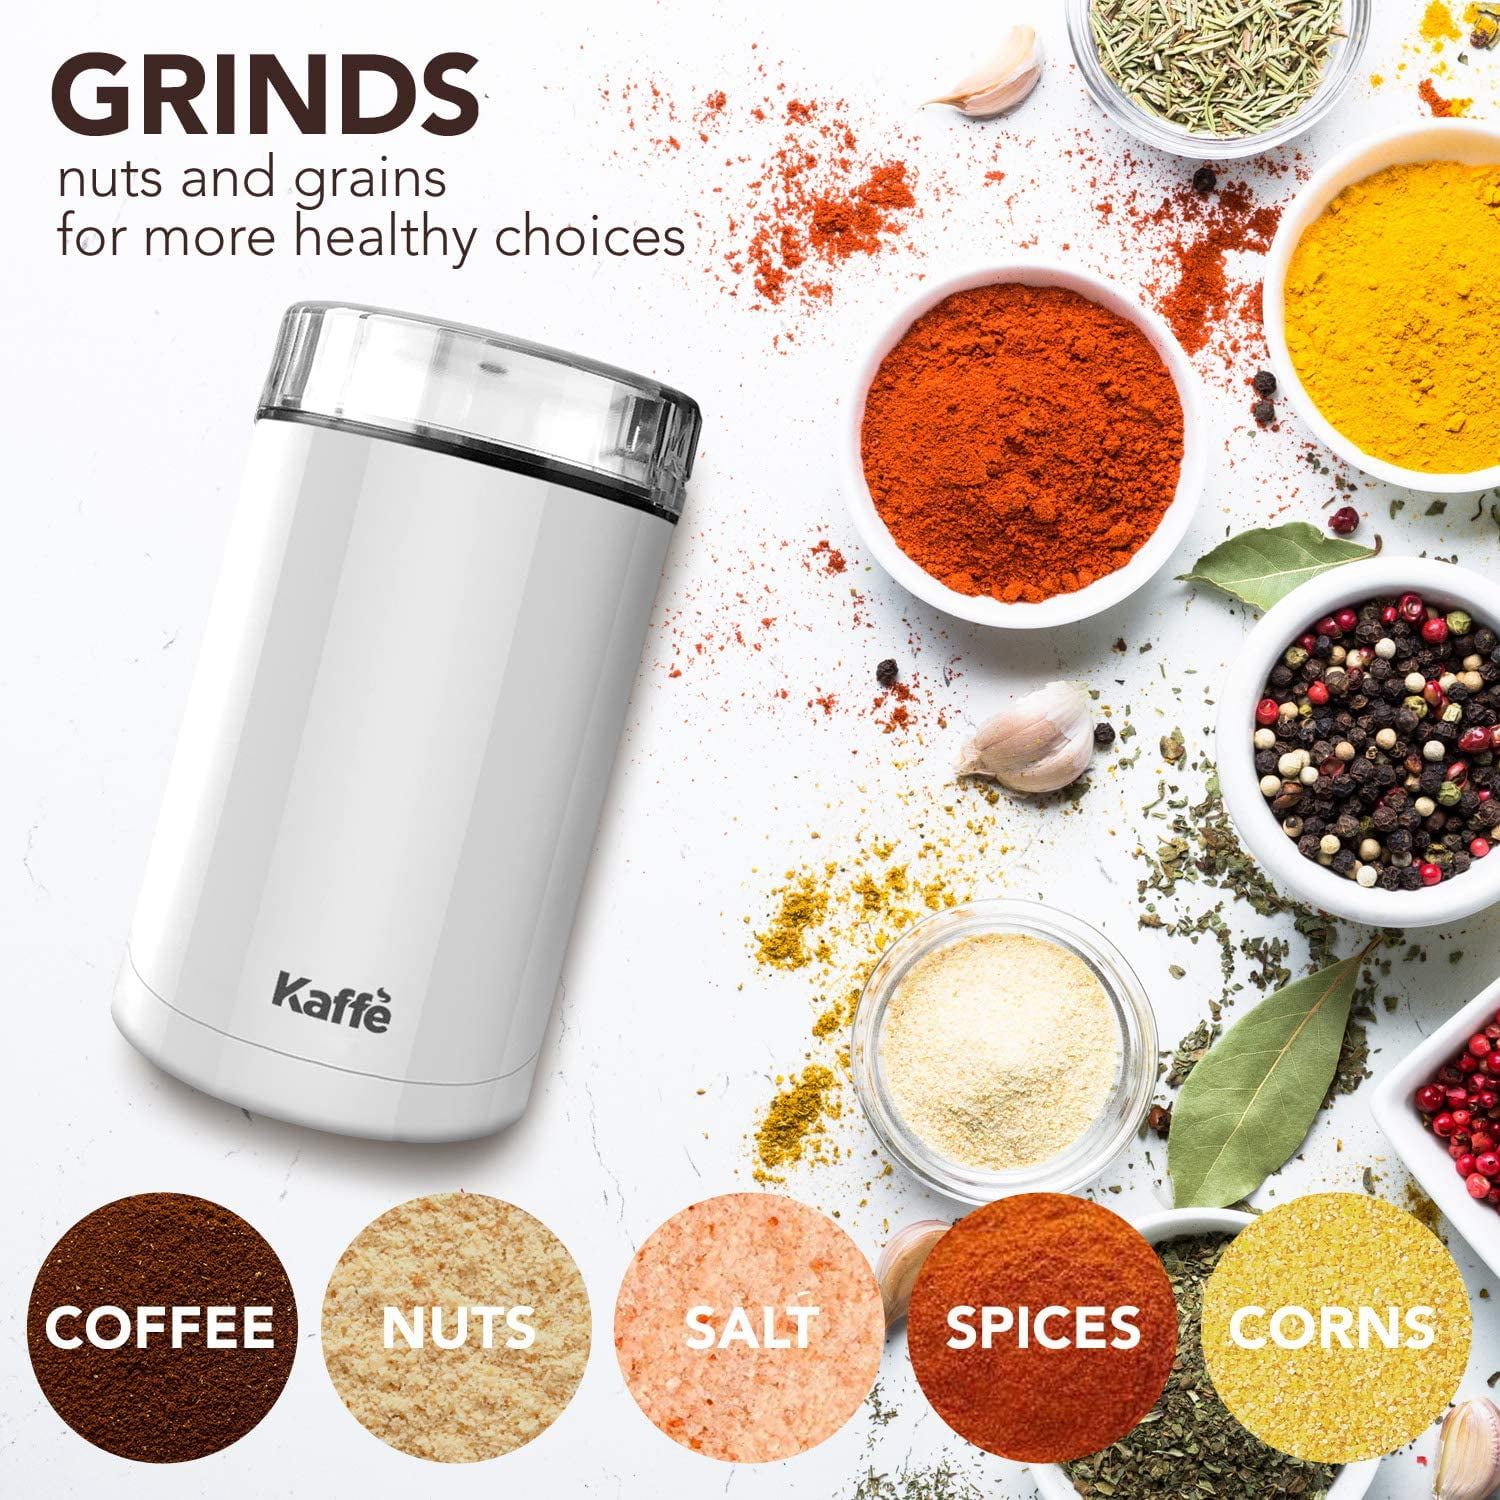 Kaffe Coffee Grinder Electric. Best Coffee Grinders for Home Use. (14 Cup)  Easy On/Off w/Cleaning Brush Included. Copper